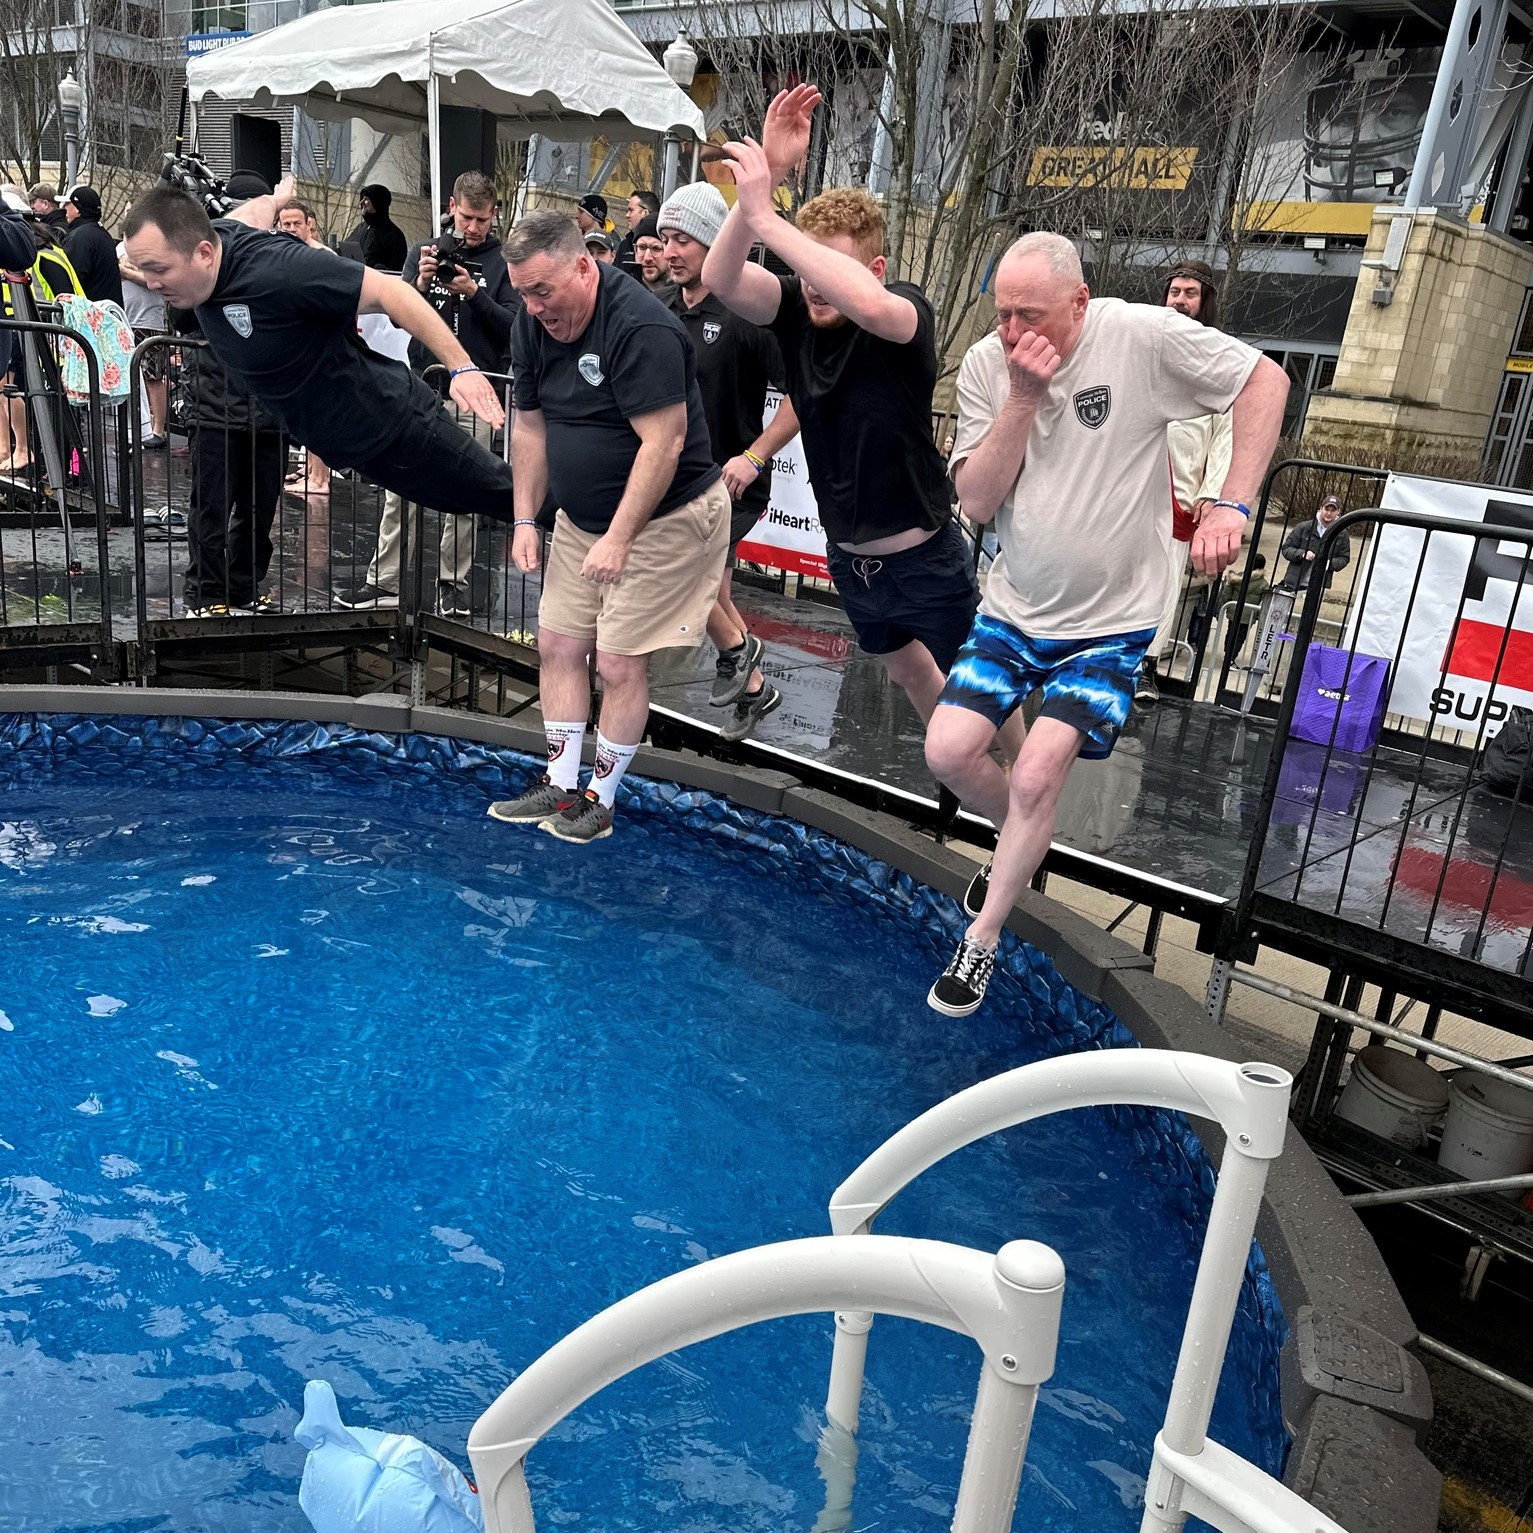 Officers jumping into pool for polar plunge